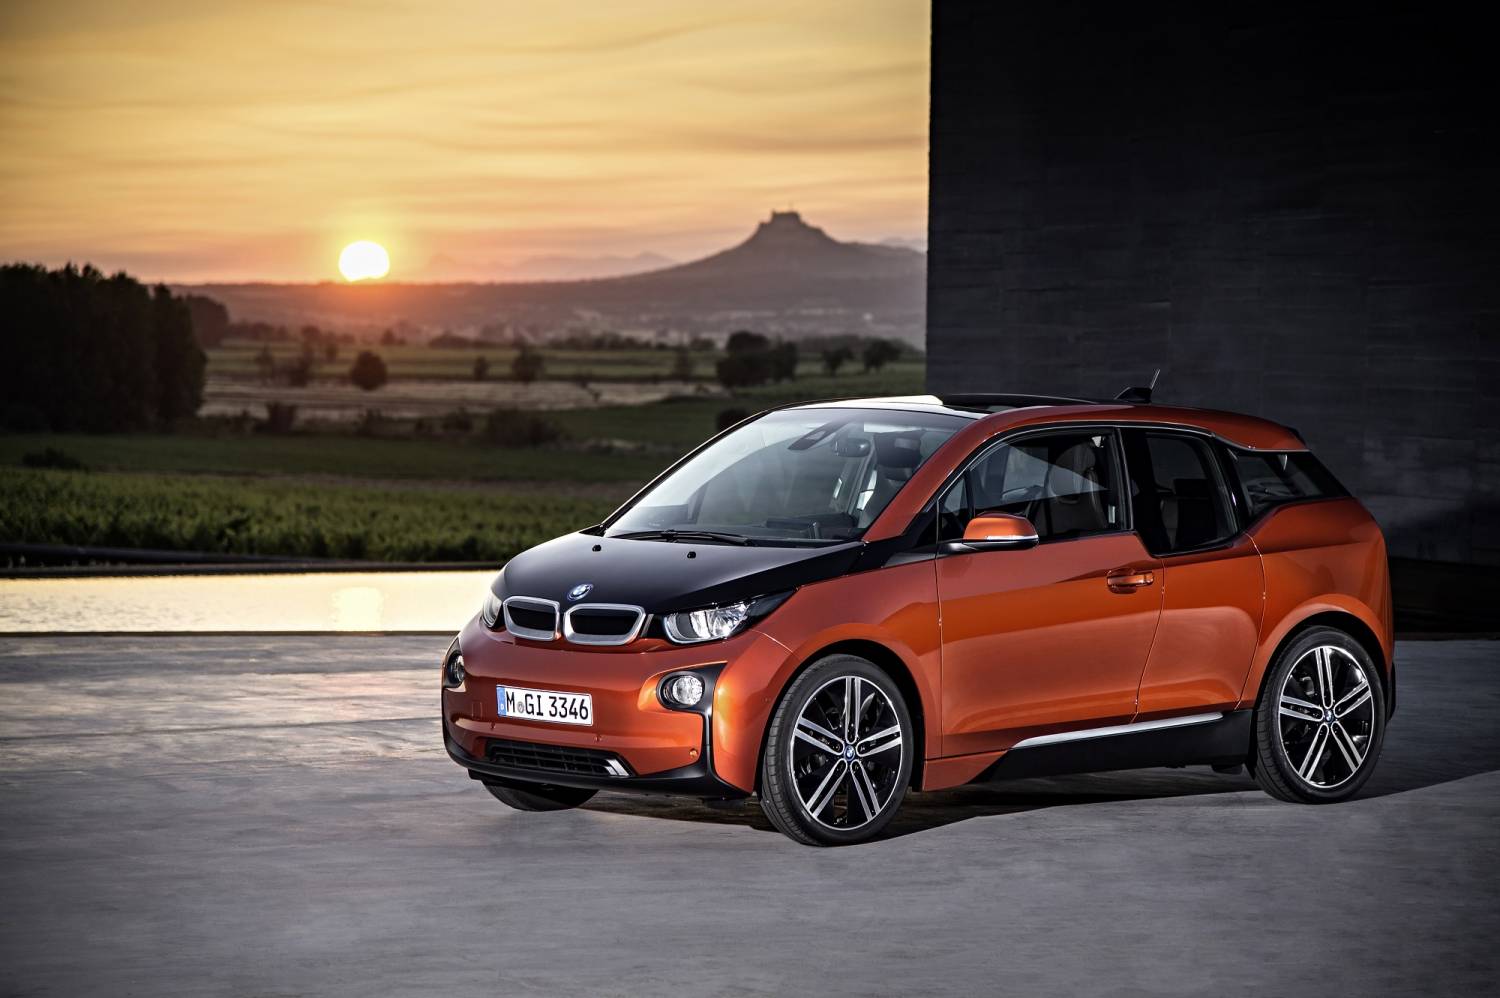 BMW i3 Extendes Its Range Into The Future